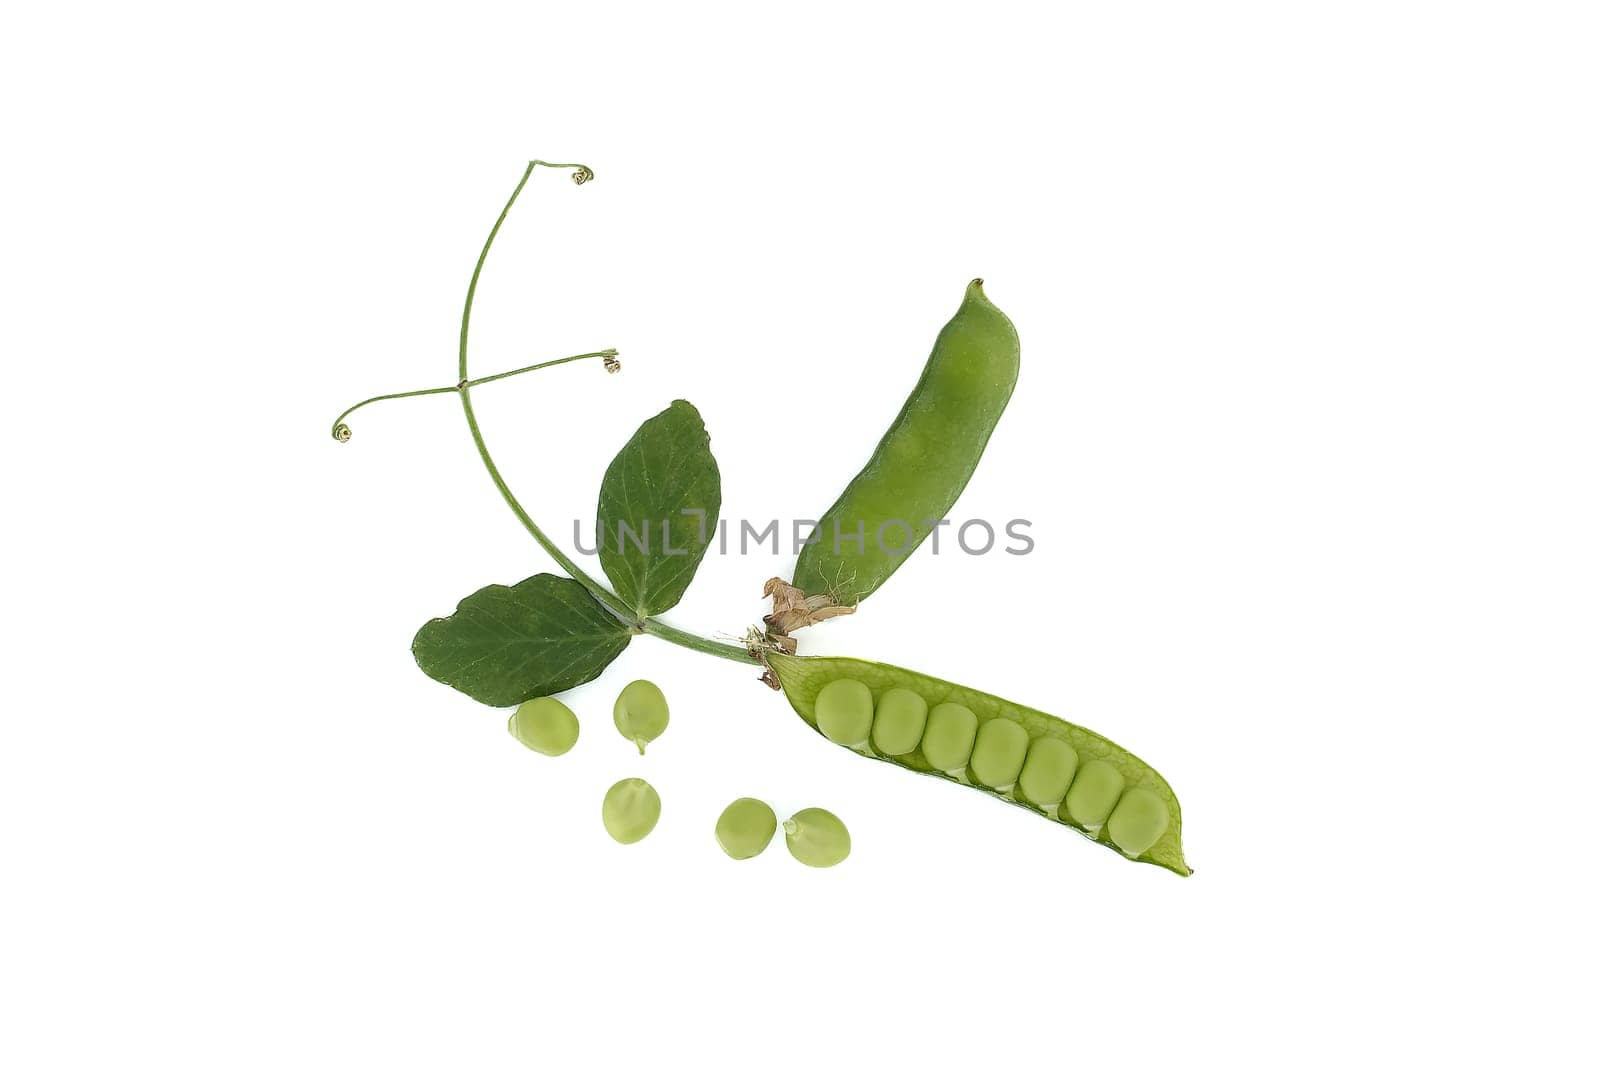 Open pea pod and round green peas inside, green leaf with a pointed tip and pea pods in close up isolated on white background